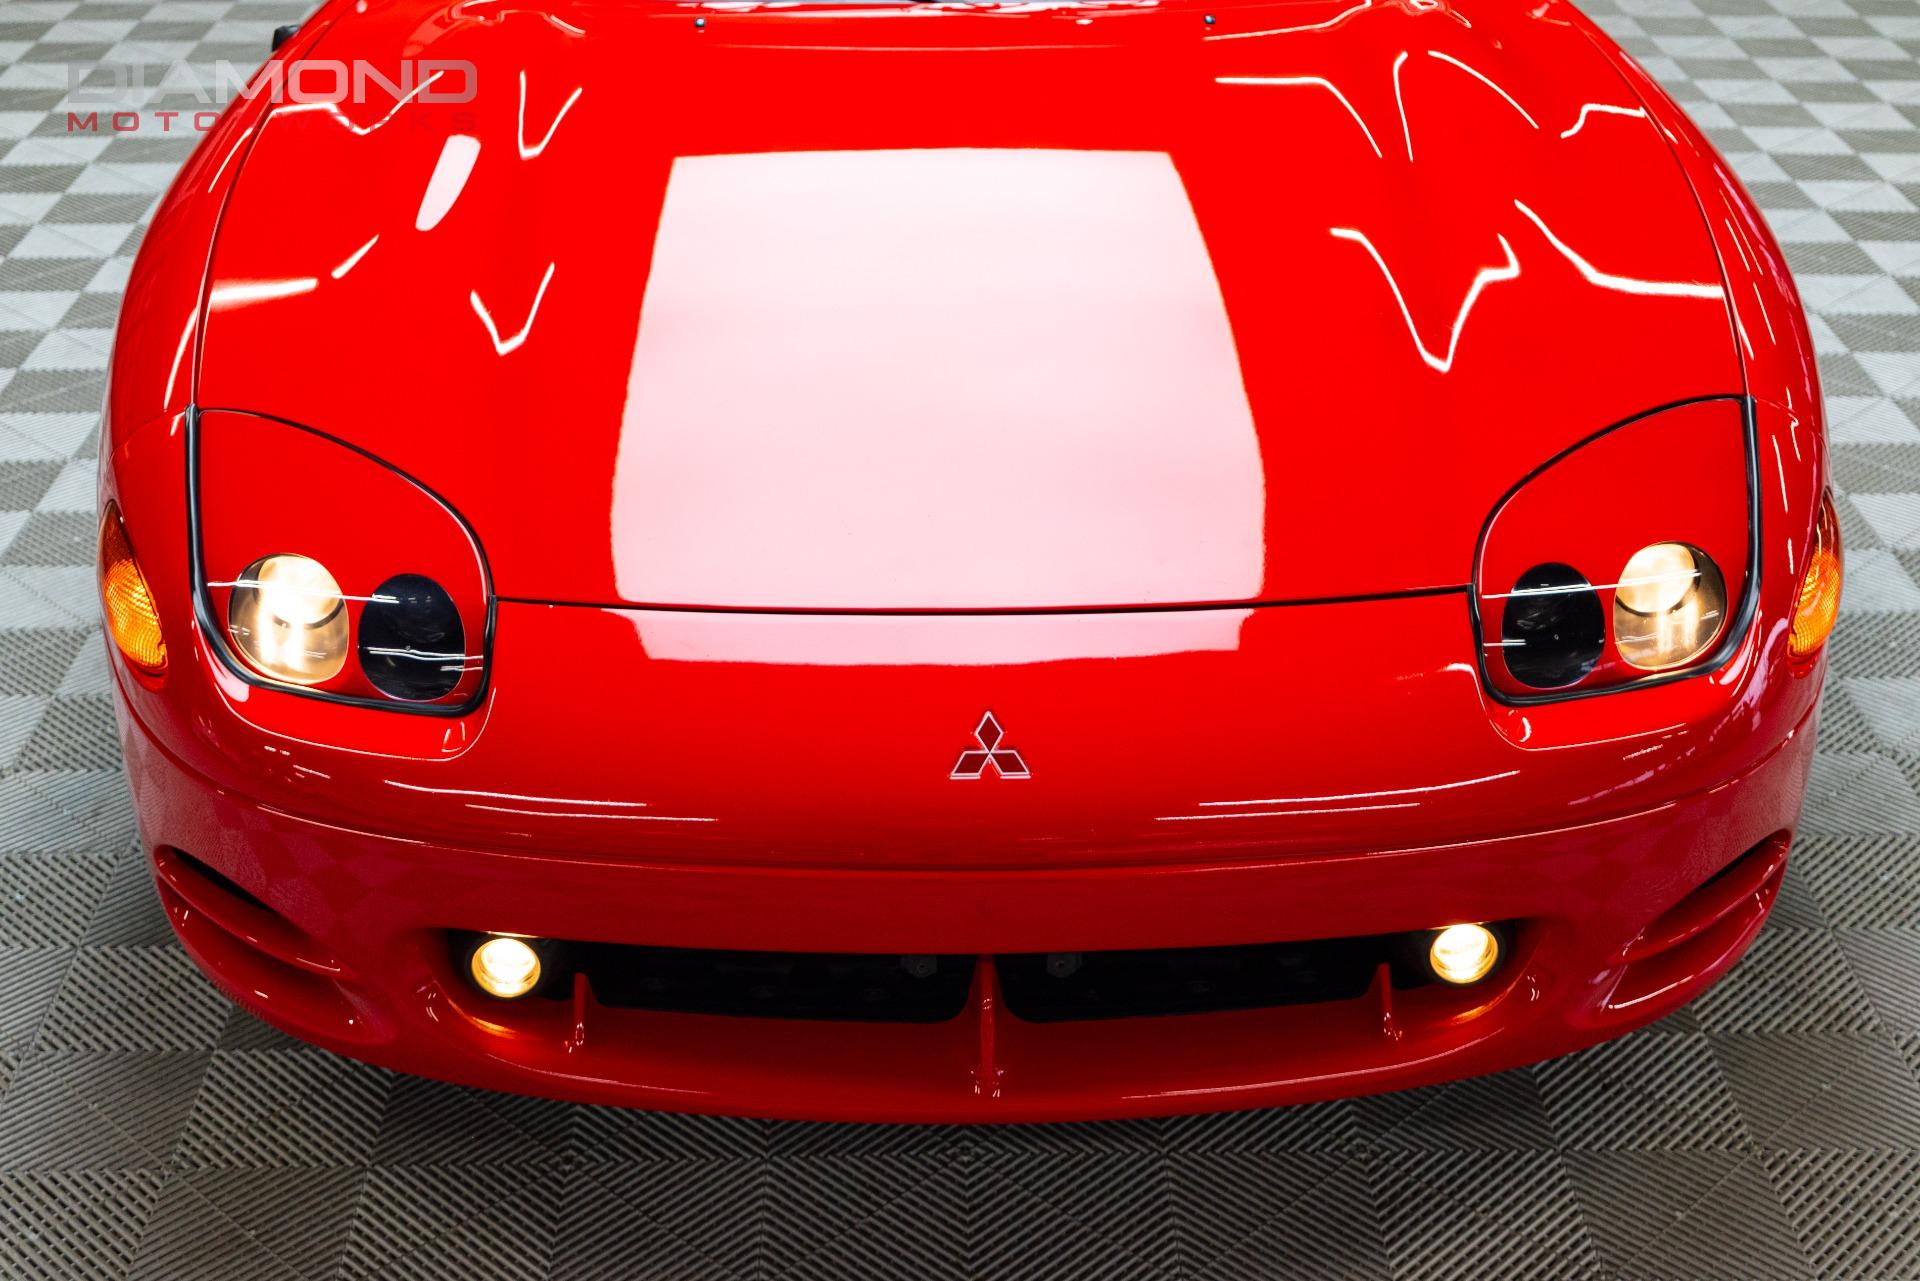 Used 1995 Mitsubishi 3000GT Spyder VR-4 Turbo For Sale (Sold 